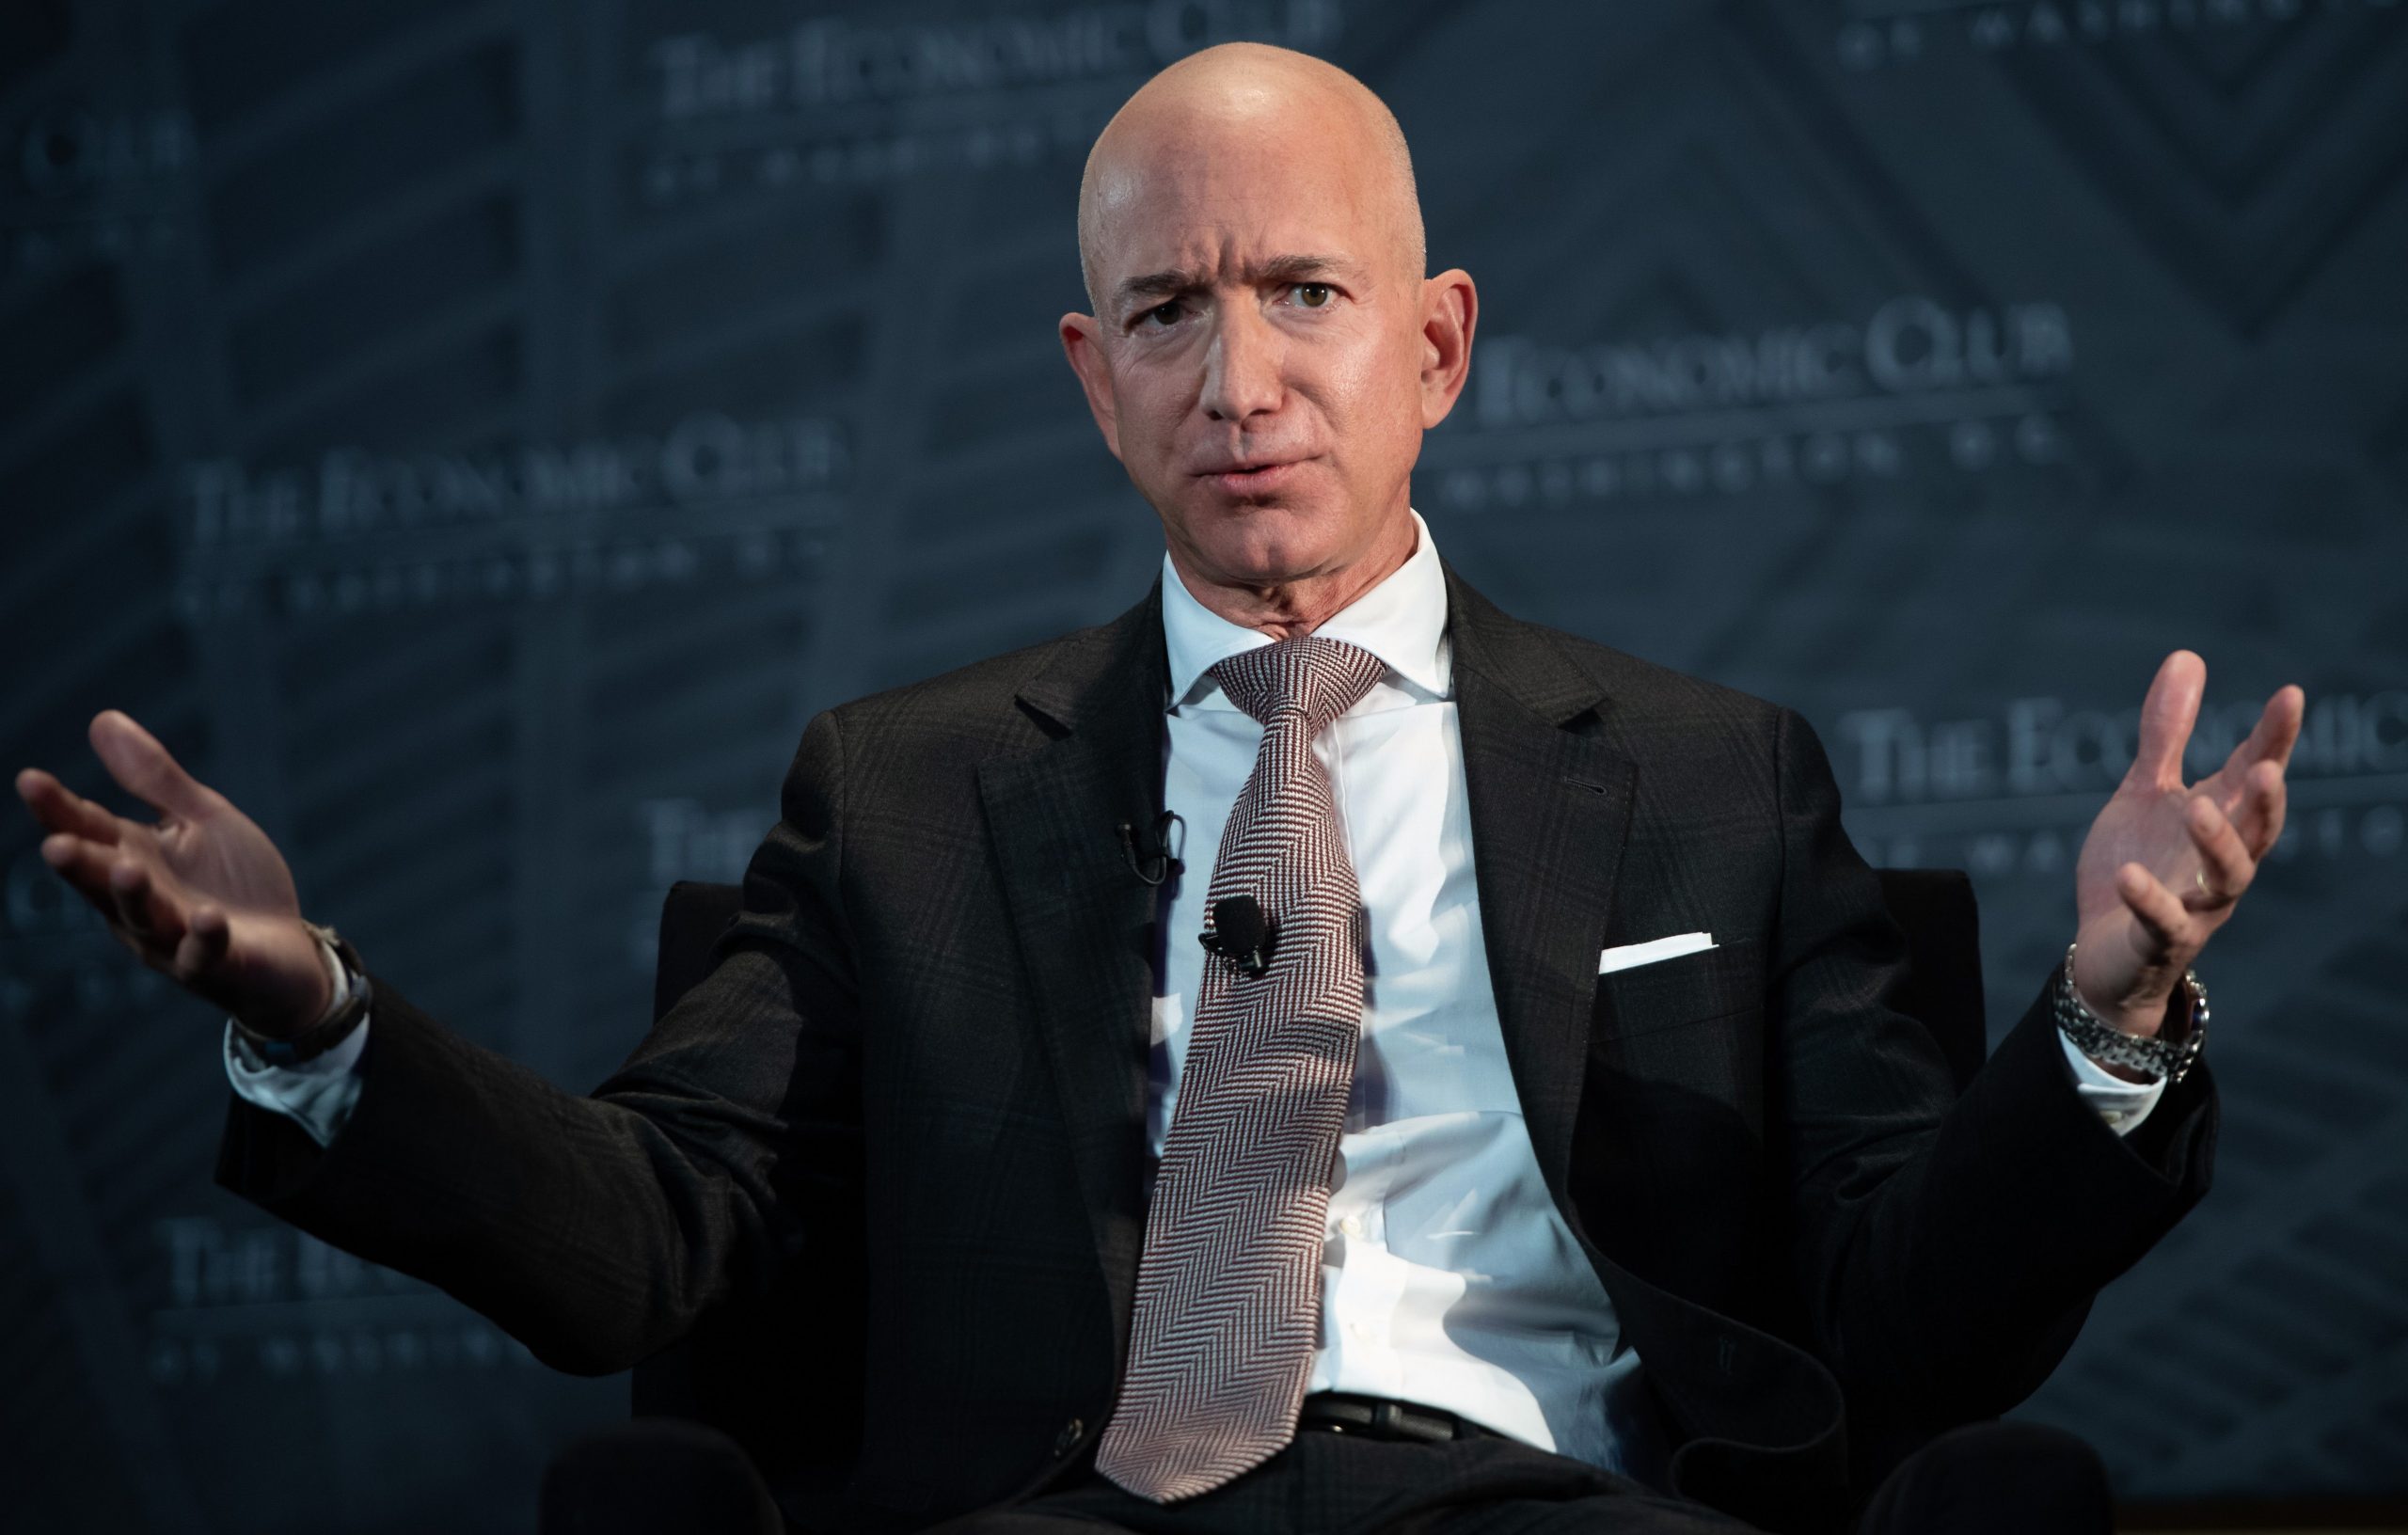 Jeff Bezos Trashes Biden for Blaming Gas Prices on Oil Companies: ‘Straight Ahead Misdirection’ or a ‘Deep Misunderstanding of Basic Market Dynamics’